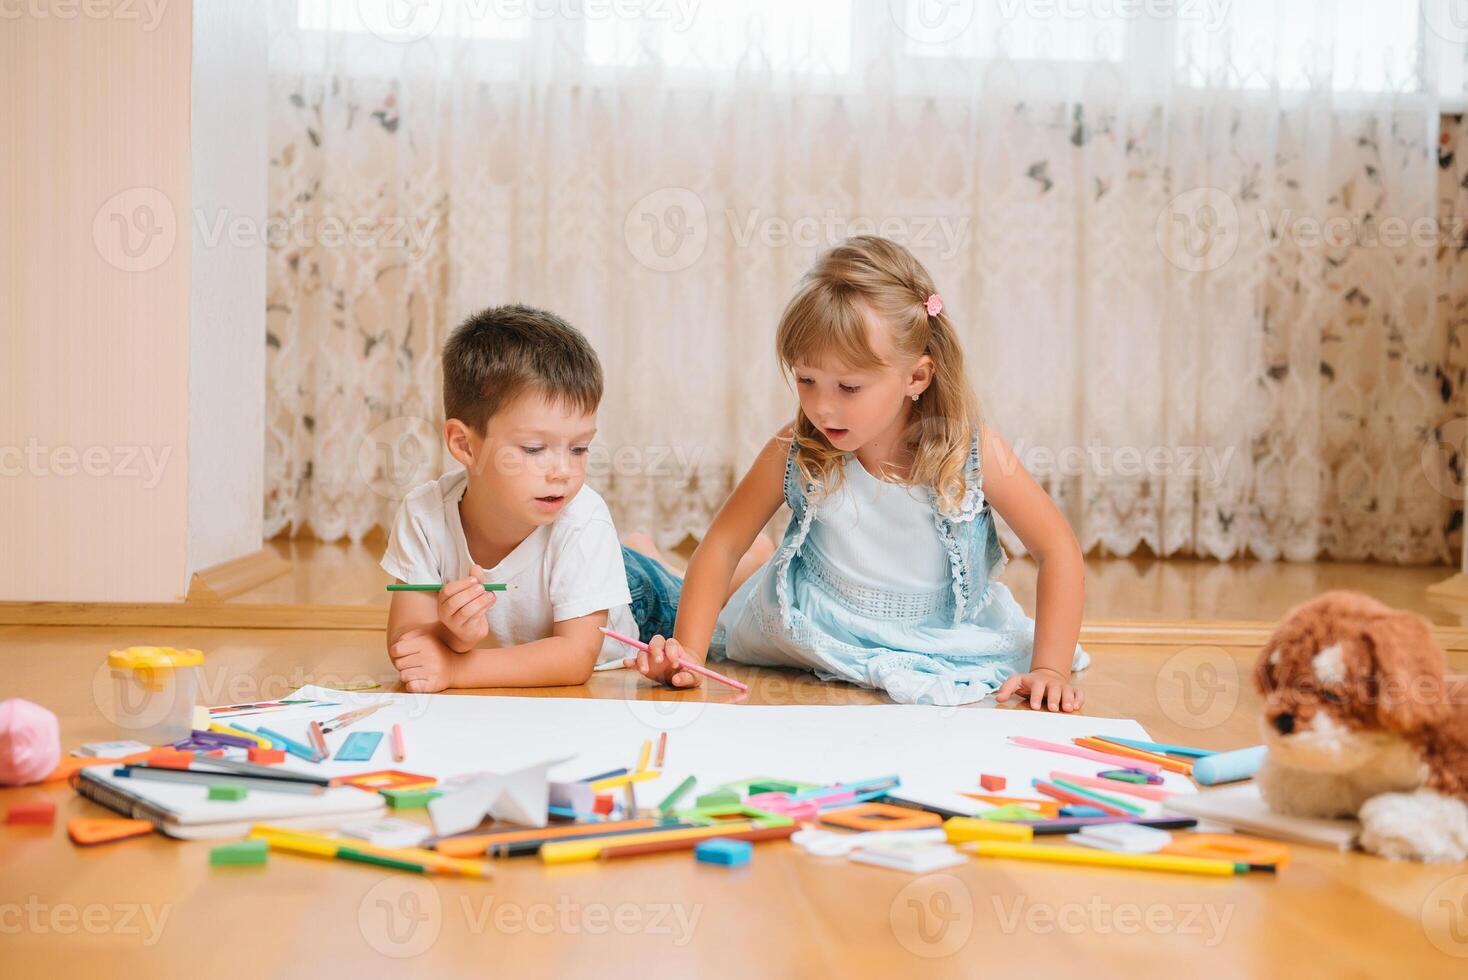 Kids drawing on floor on paper. Preschool boy and girl play on floor with educational toys - blocks, train, railroad, plane. Toys for preschool and kindergarten. Children at home or daycare photo